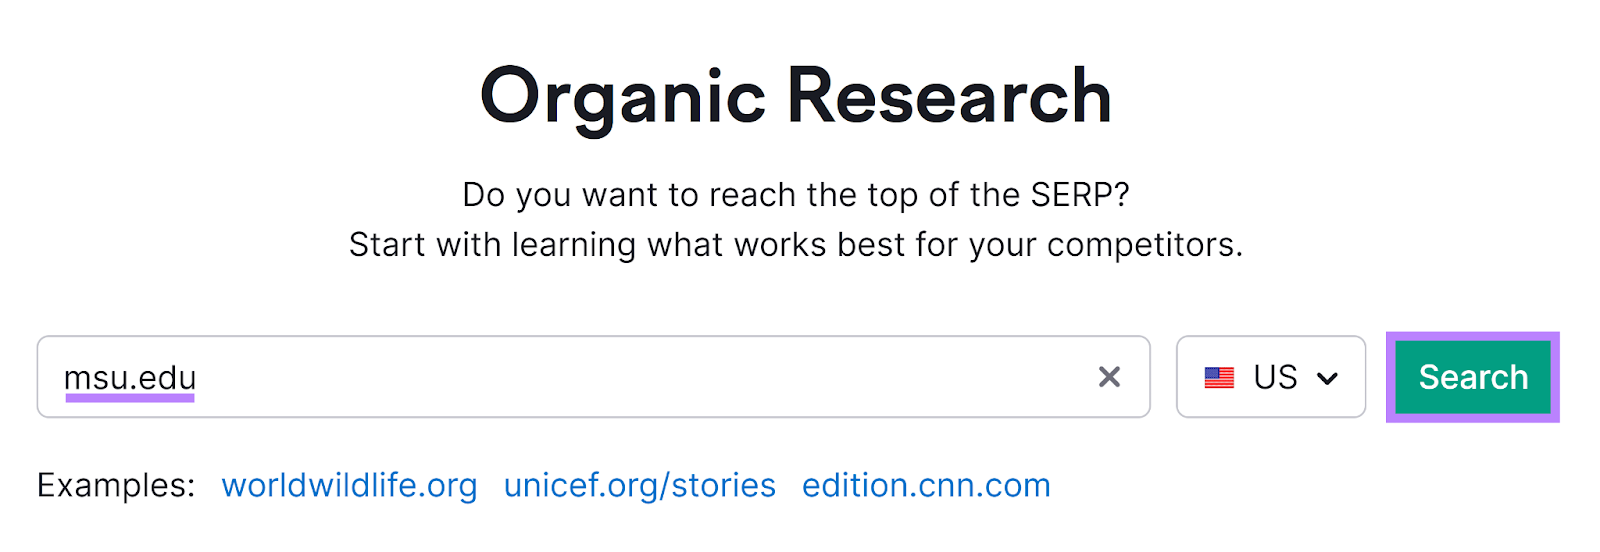 Organic Research tool start with domain entered and Search button highlighted.